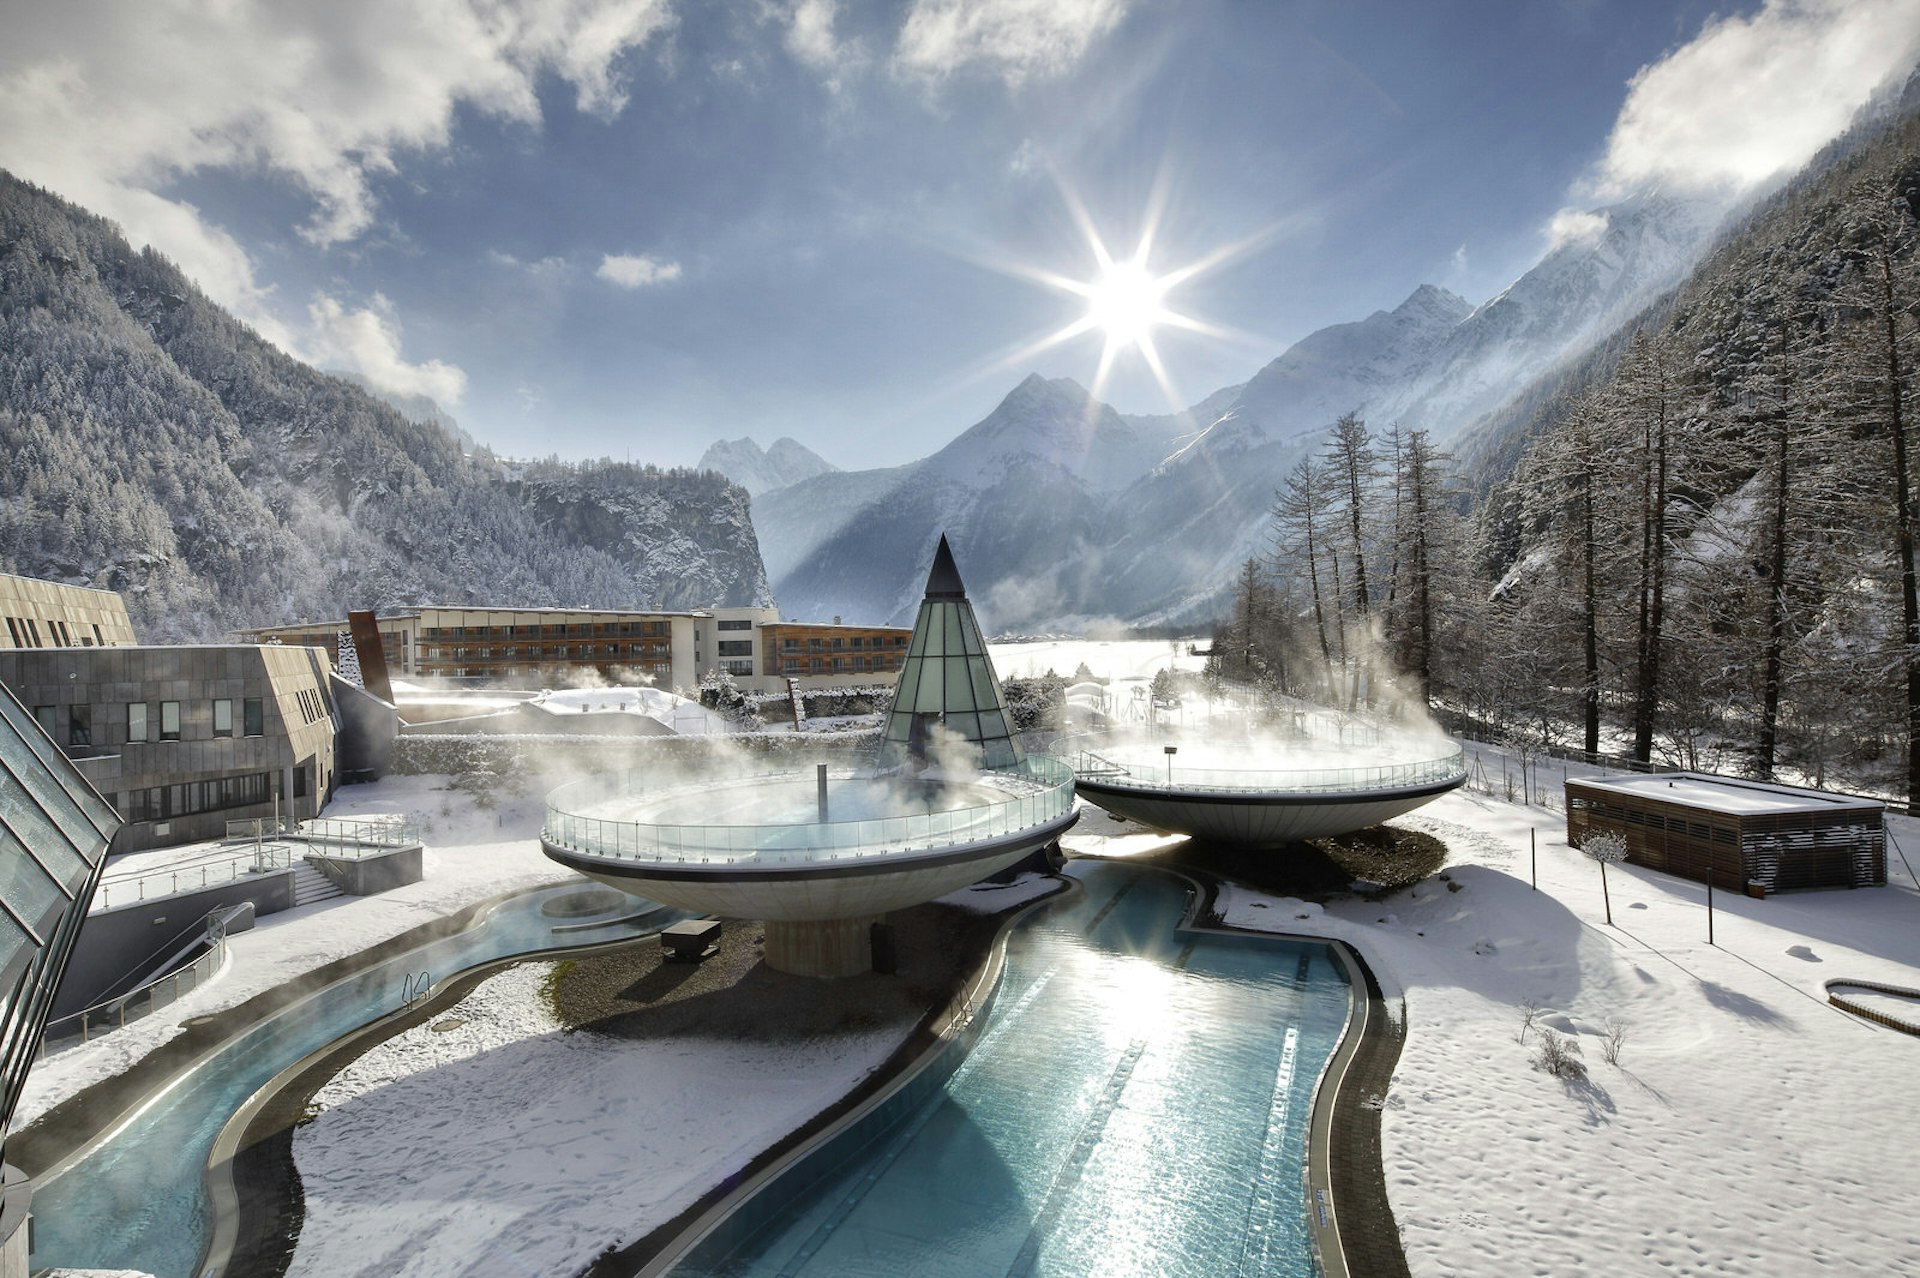 The Aqua Dome complex with its 'levitating' outdoor pools shrouded in snow